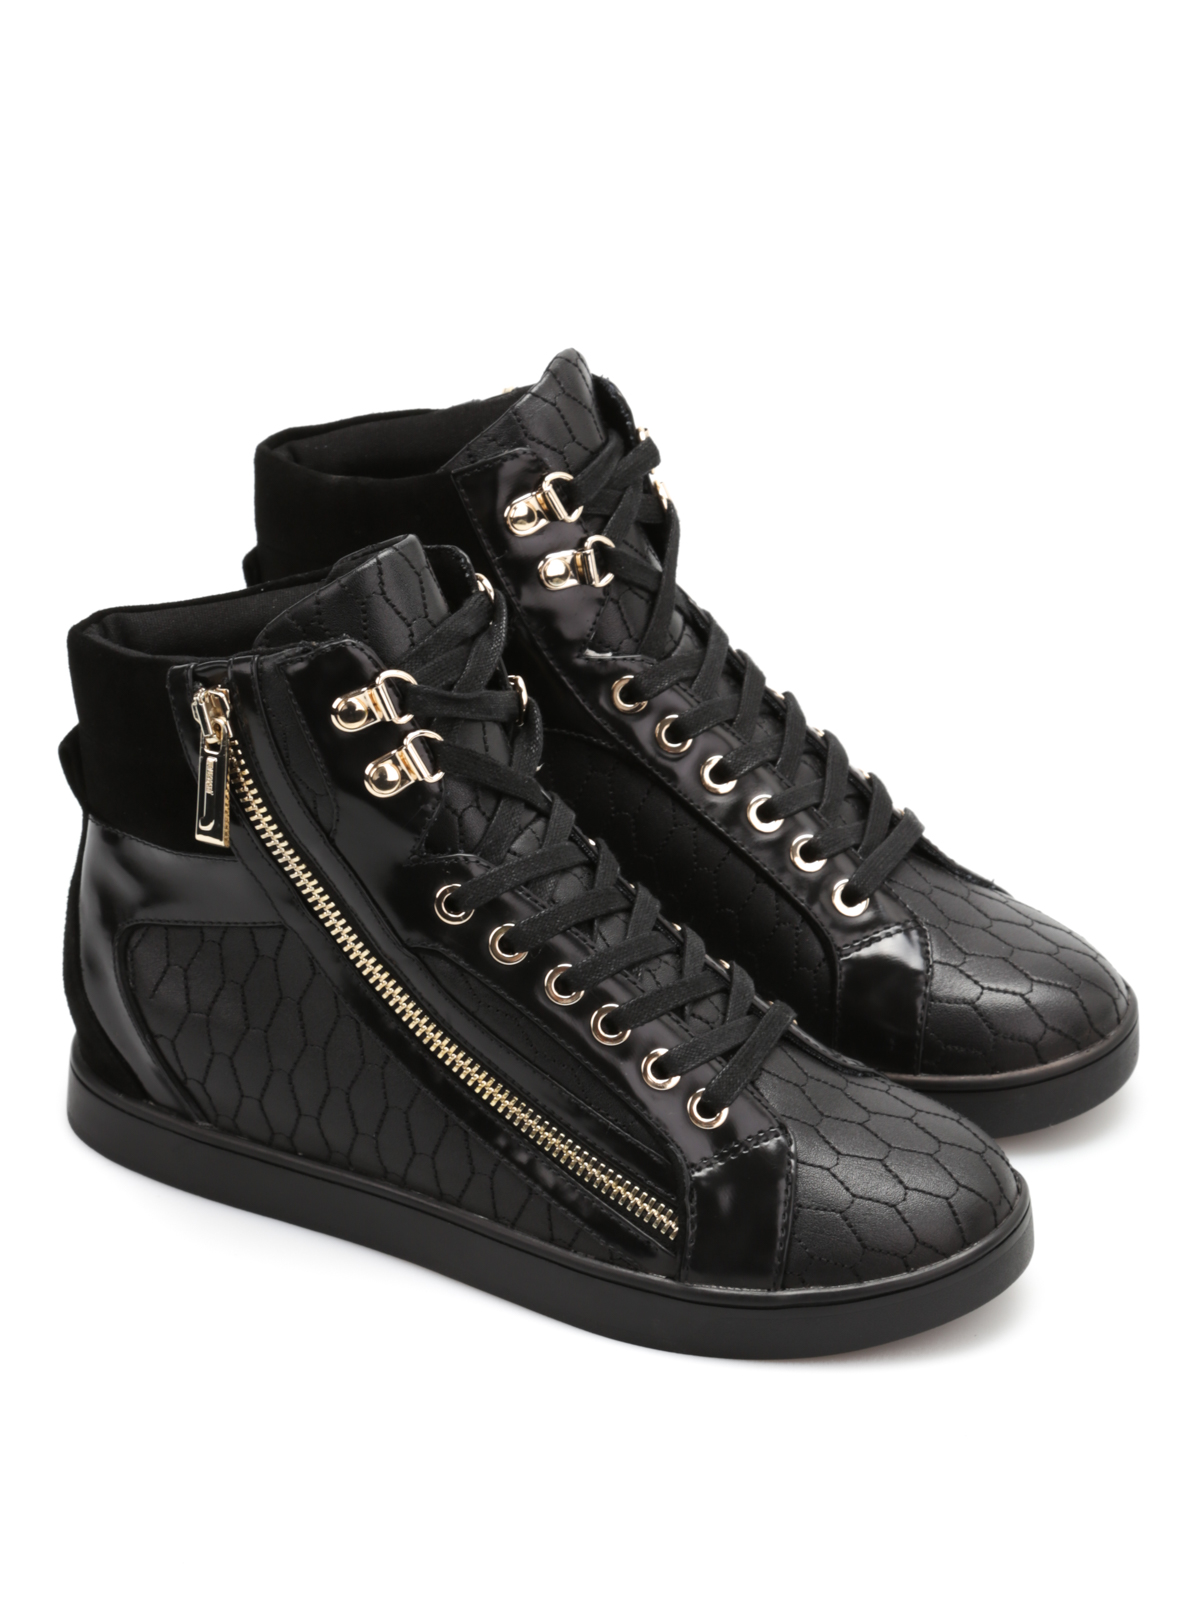 Just Cavalli - Hive leather high top 